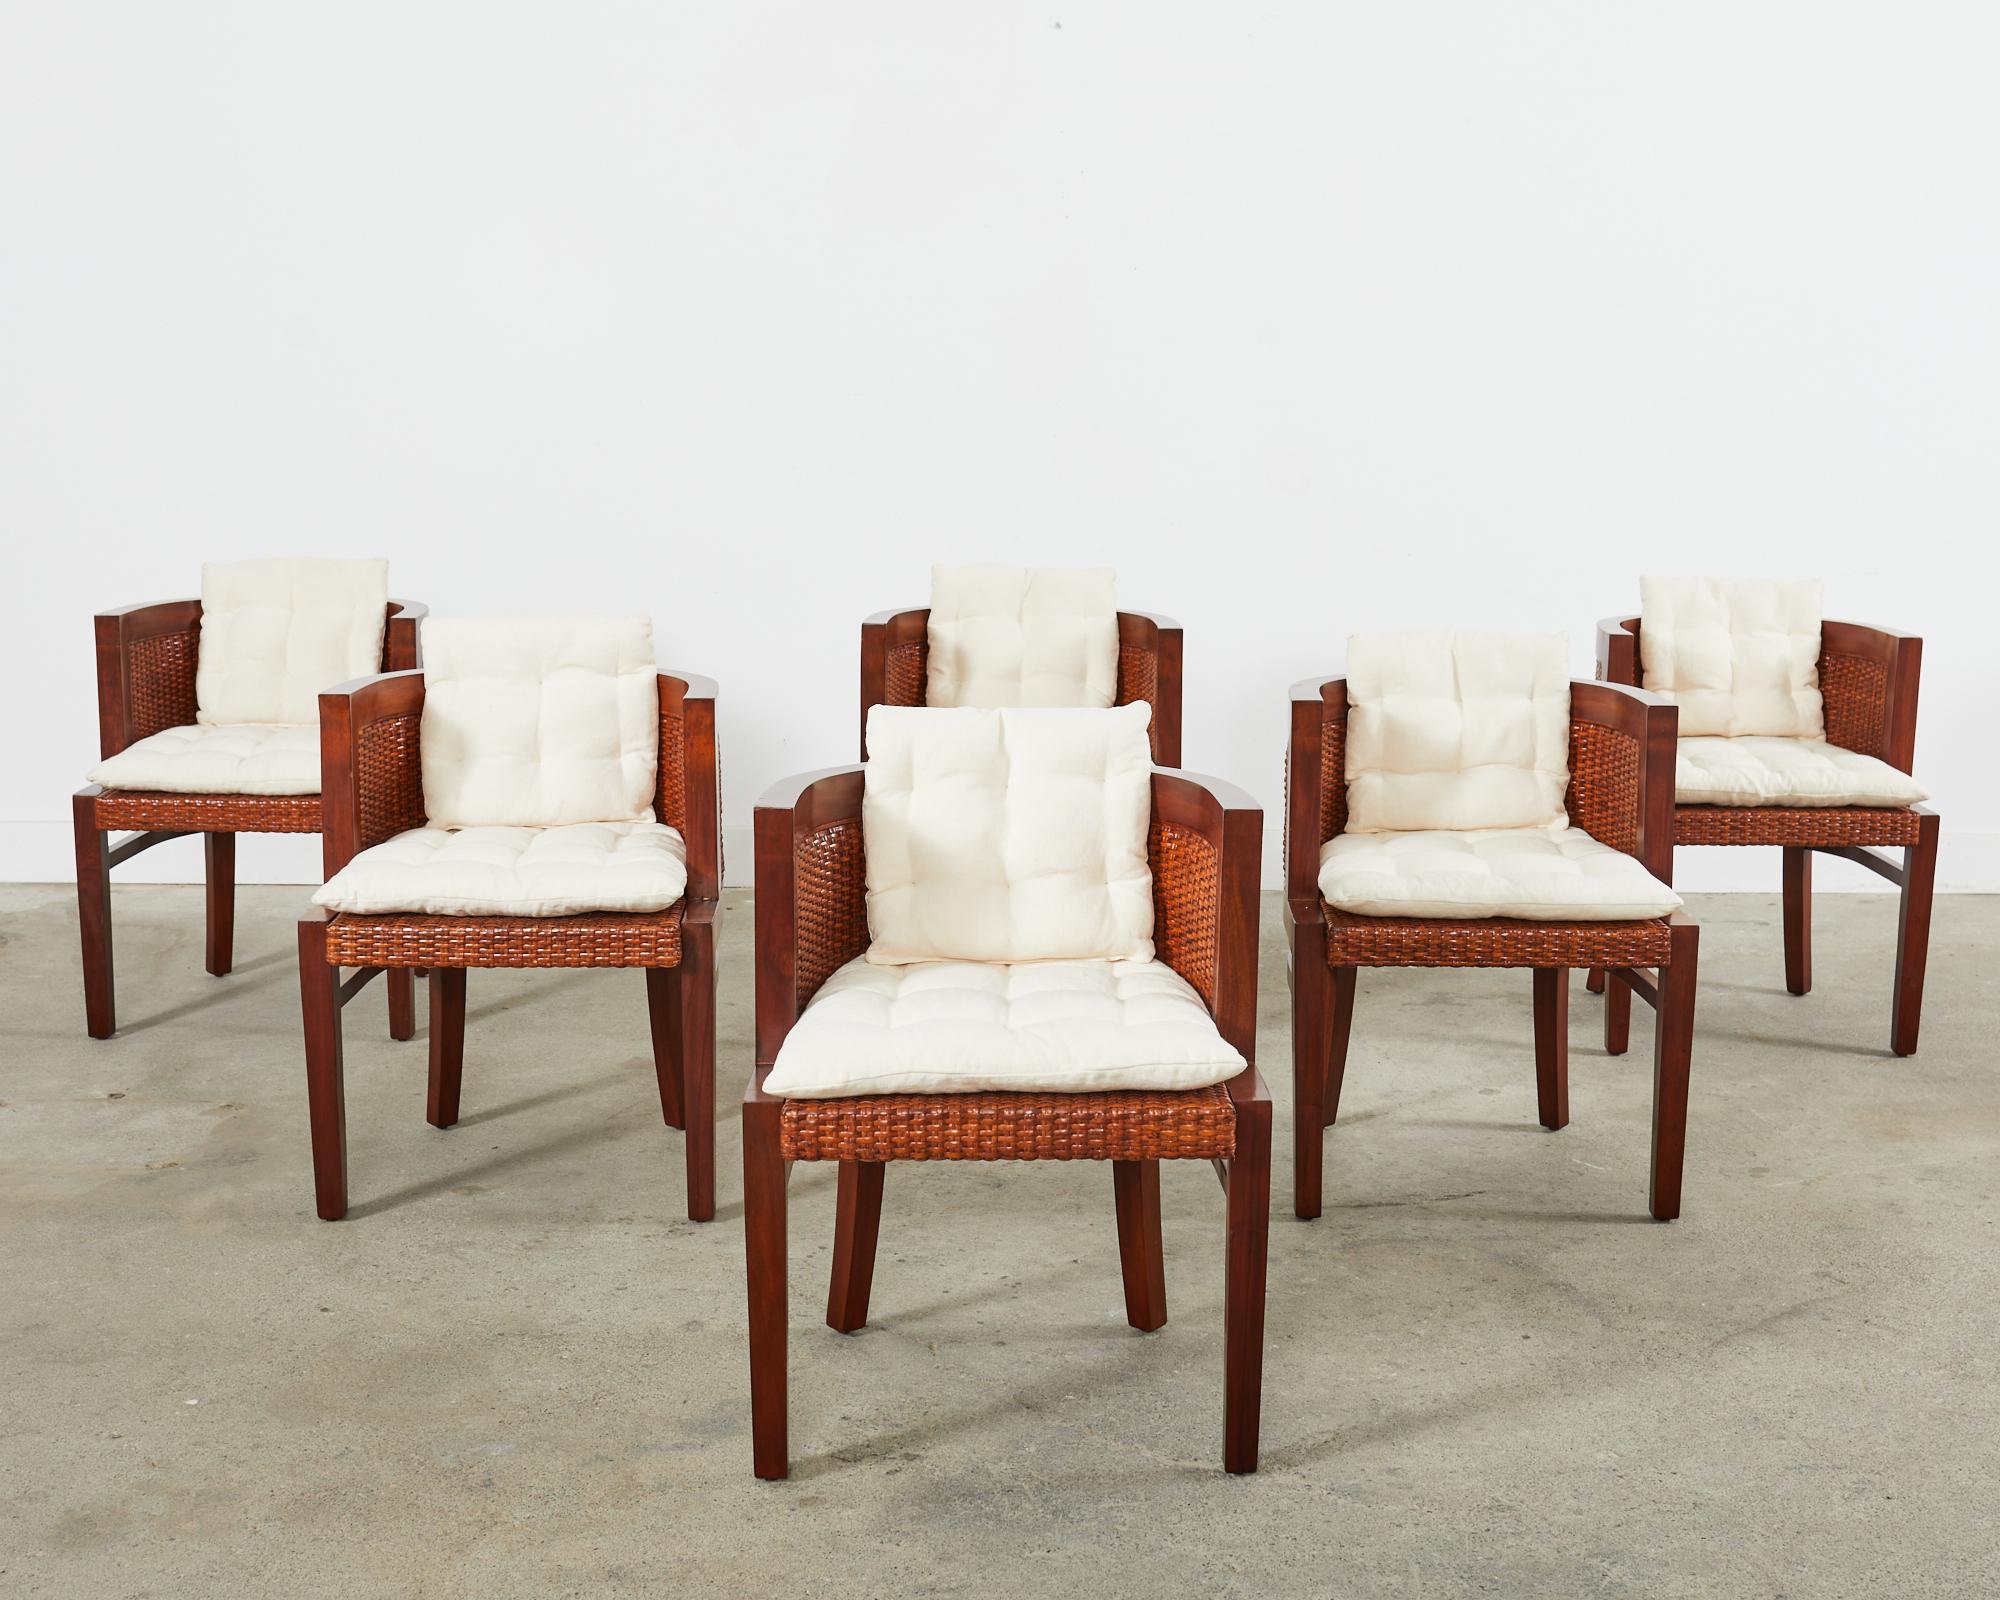 Rare set of six barrel back form dining chairs or armchairs made in the British colonial style by Ralph Lauren Home. Known as Modern Sands collection chairs they feature a mahogany frame with a round back inset with woven rattan on the seat and